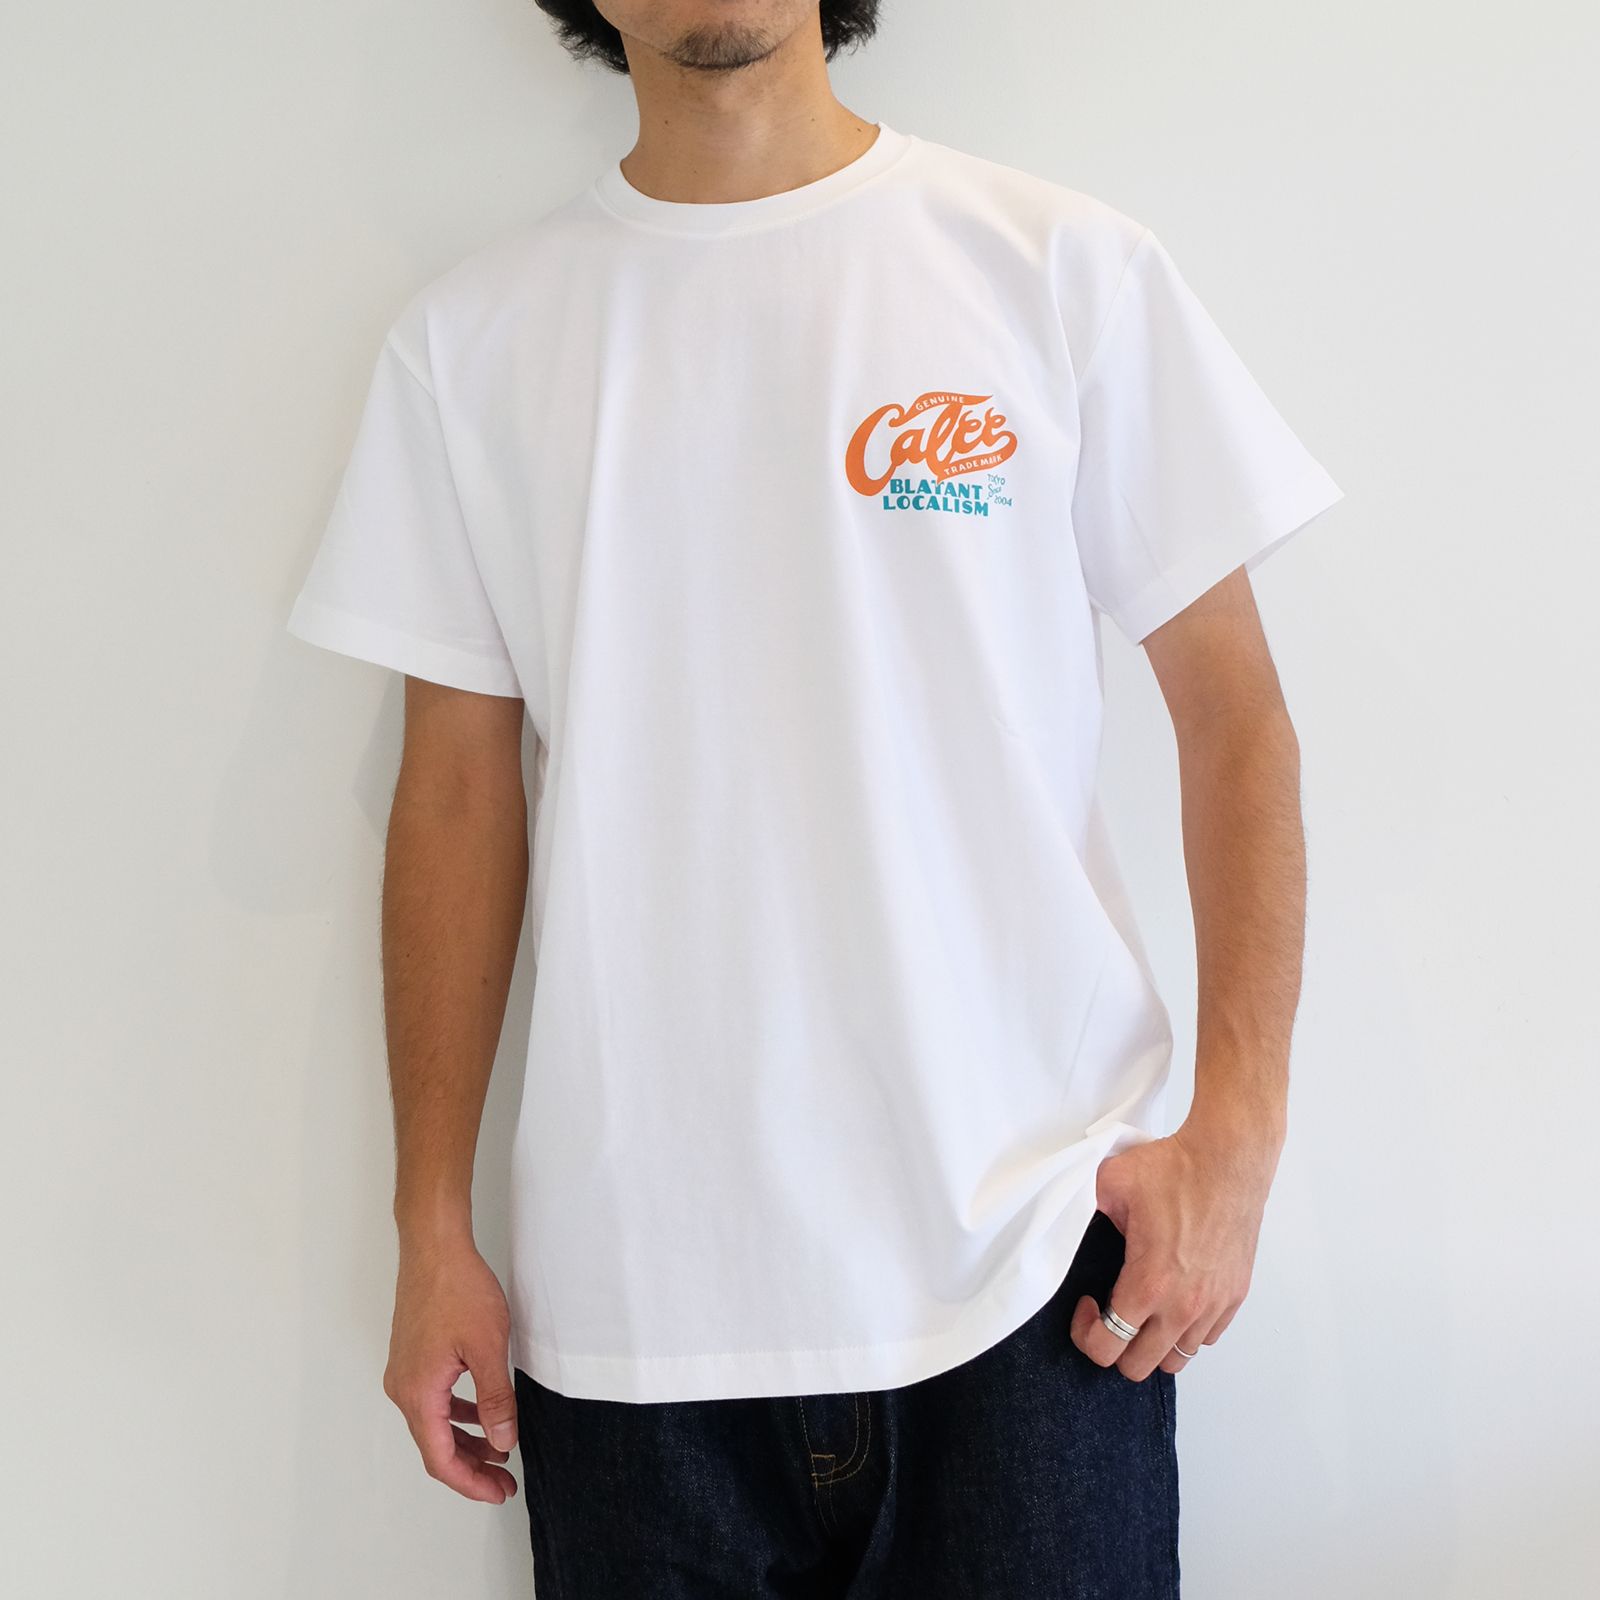 CALEE - Stretch calee logo t-shirt -Naturally paint design